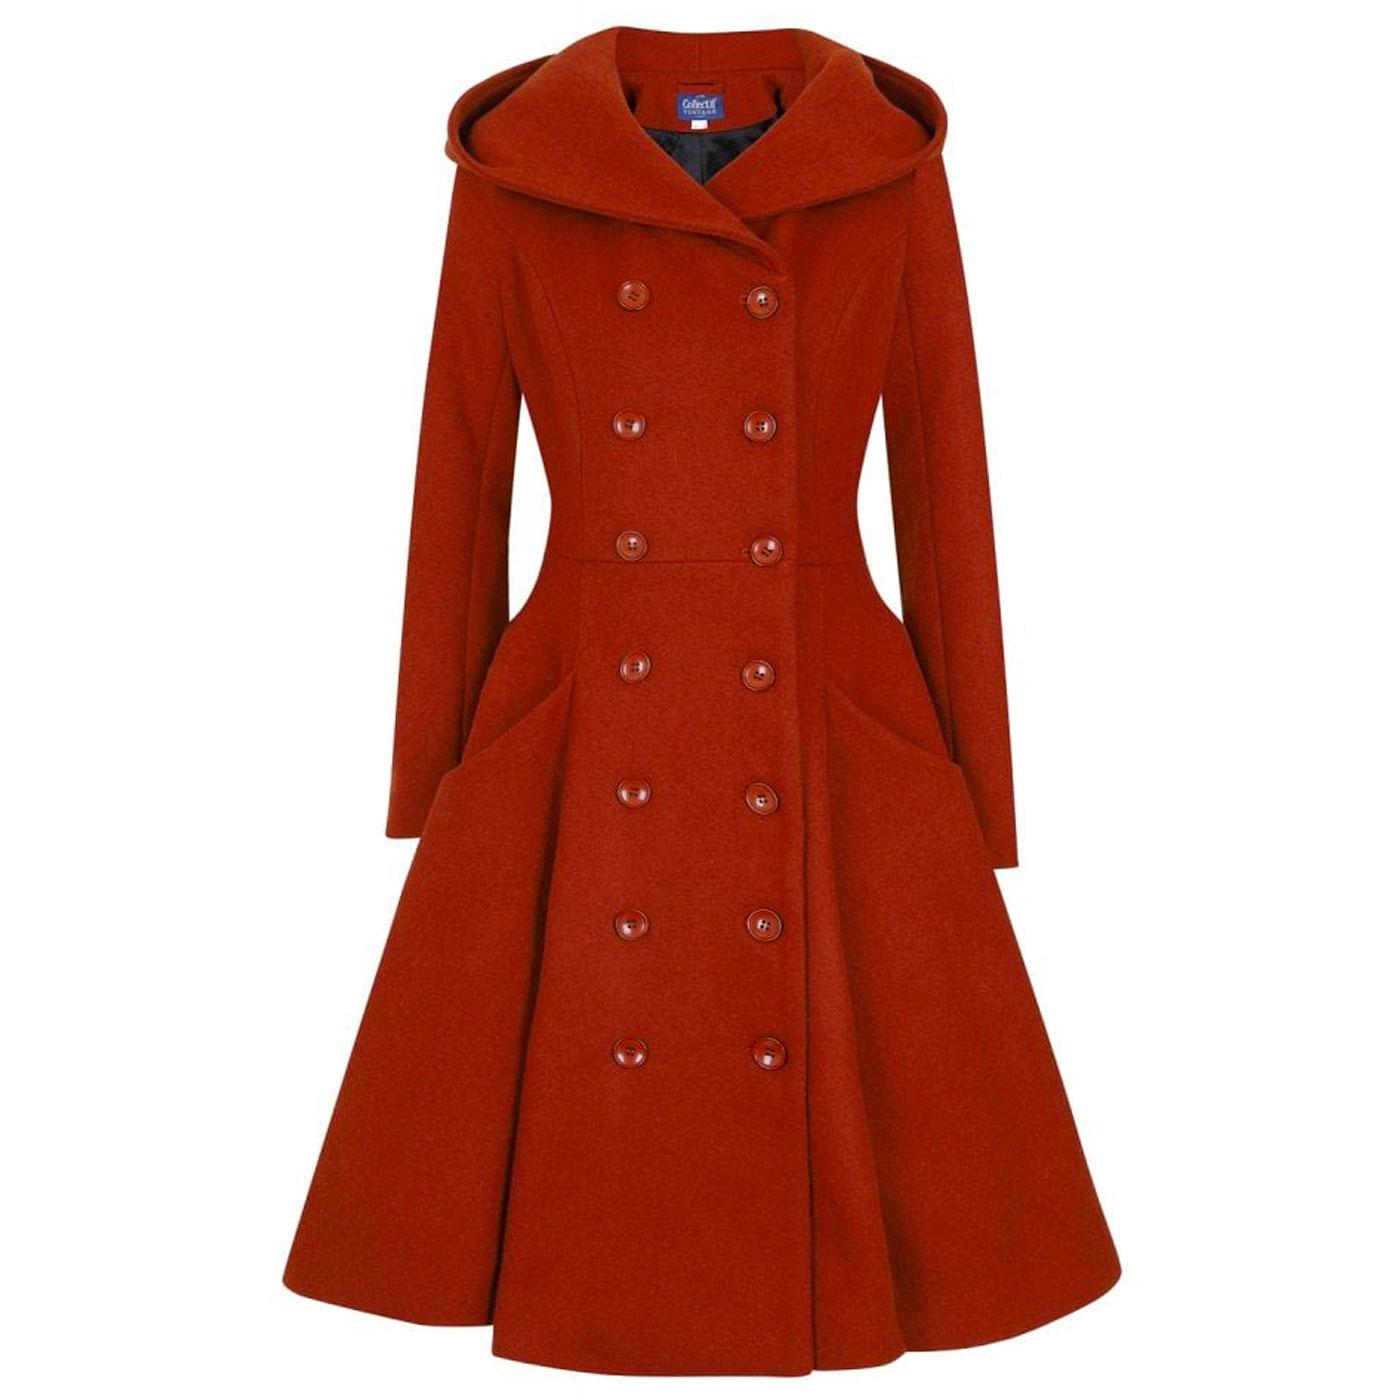 Heather COLLECTIF Hooded Autumnal Swing Coat